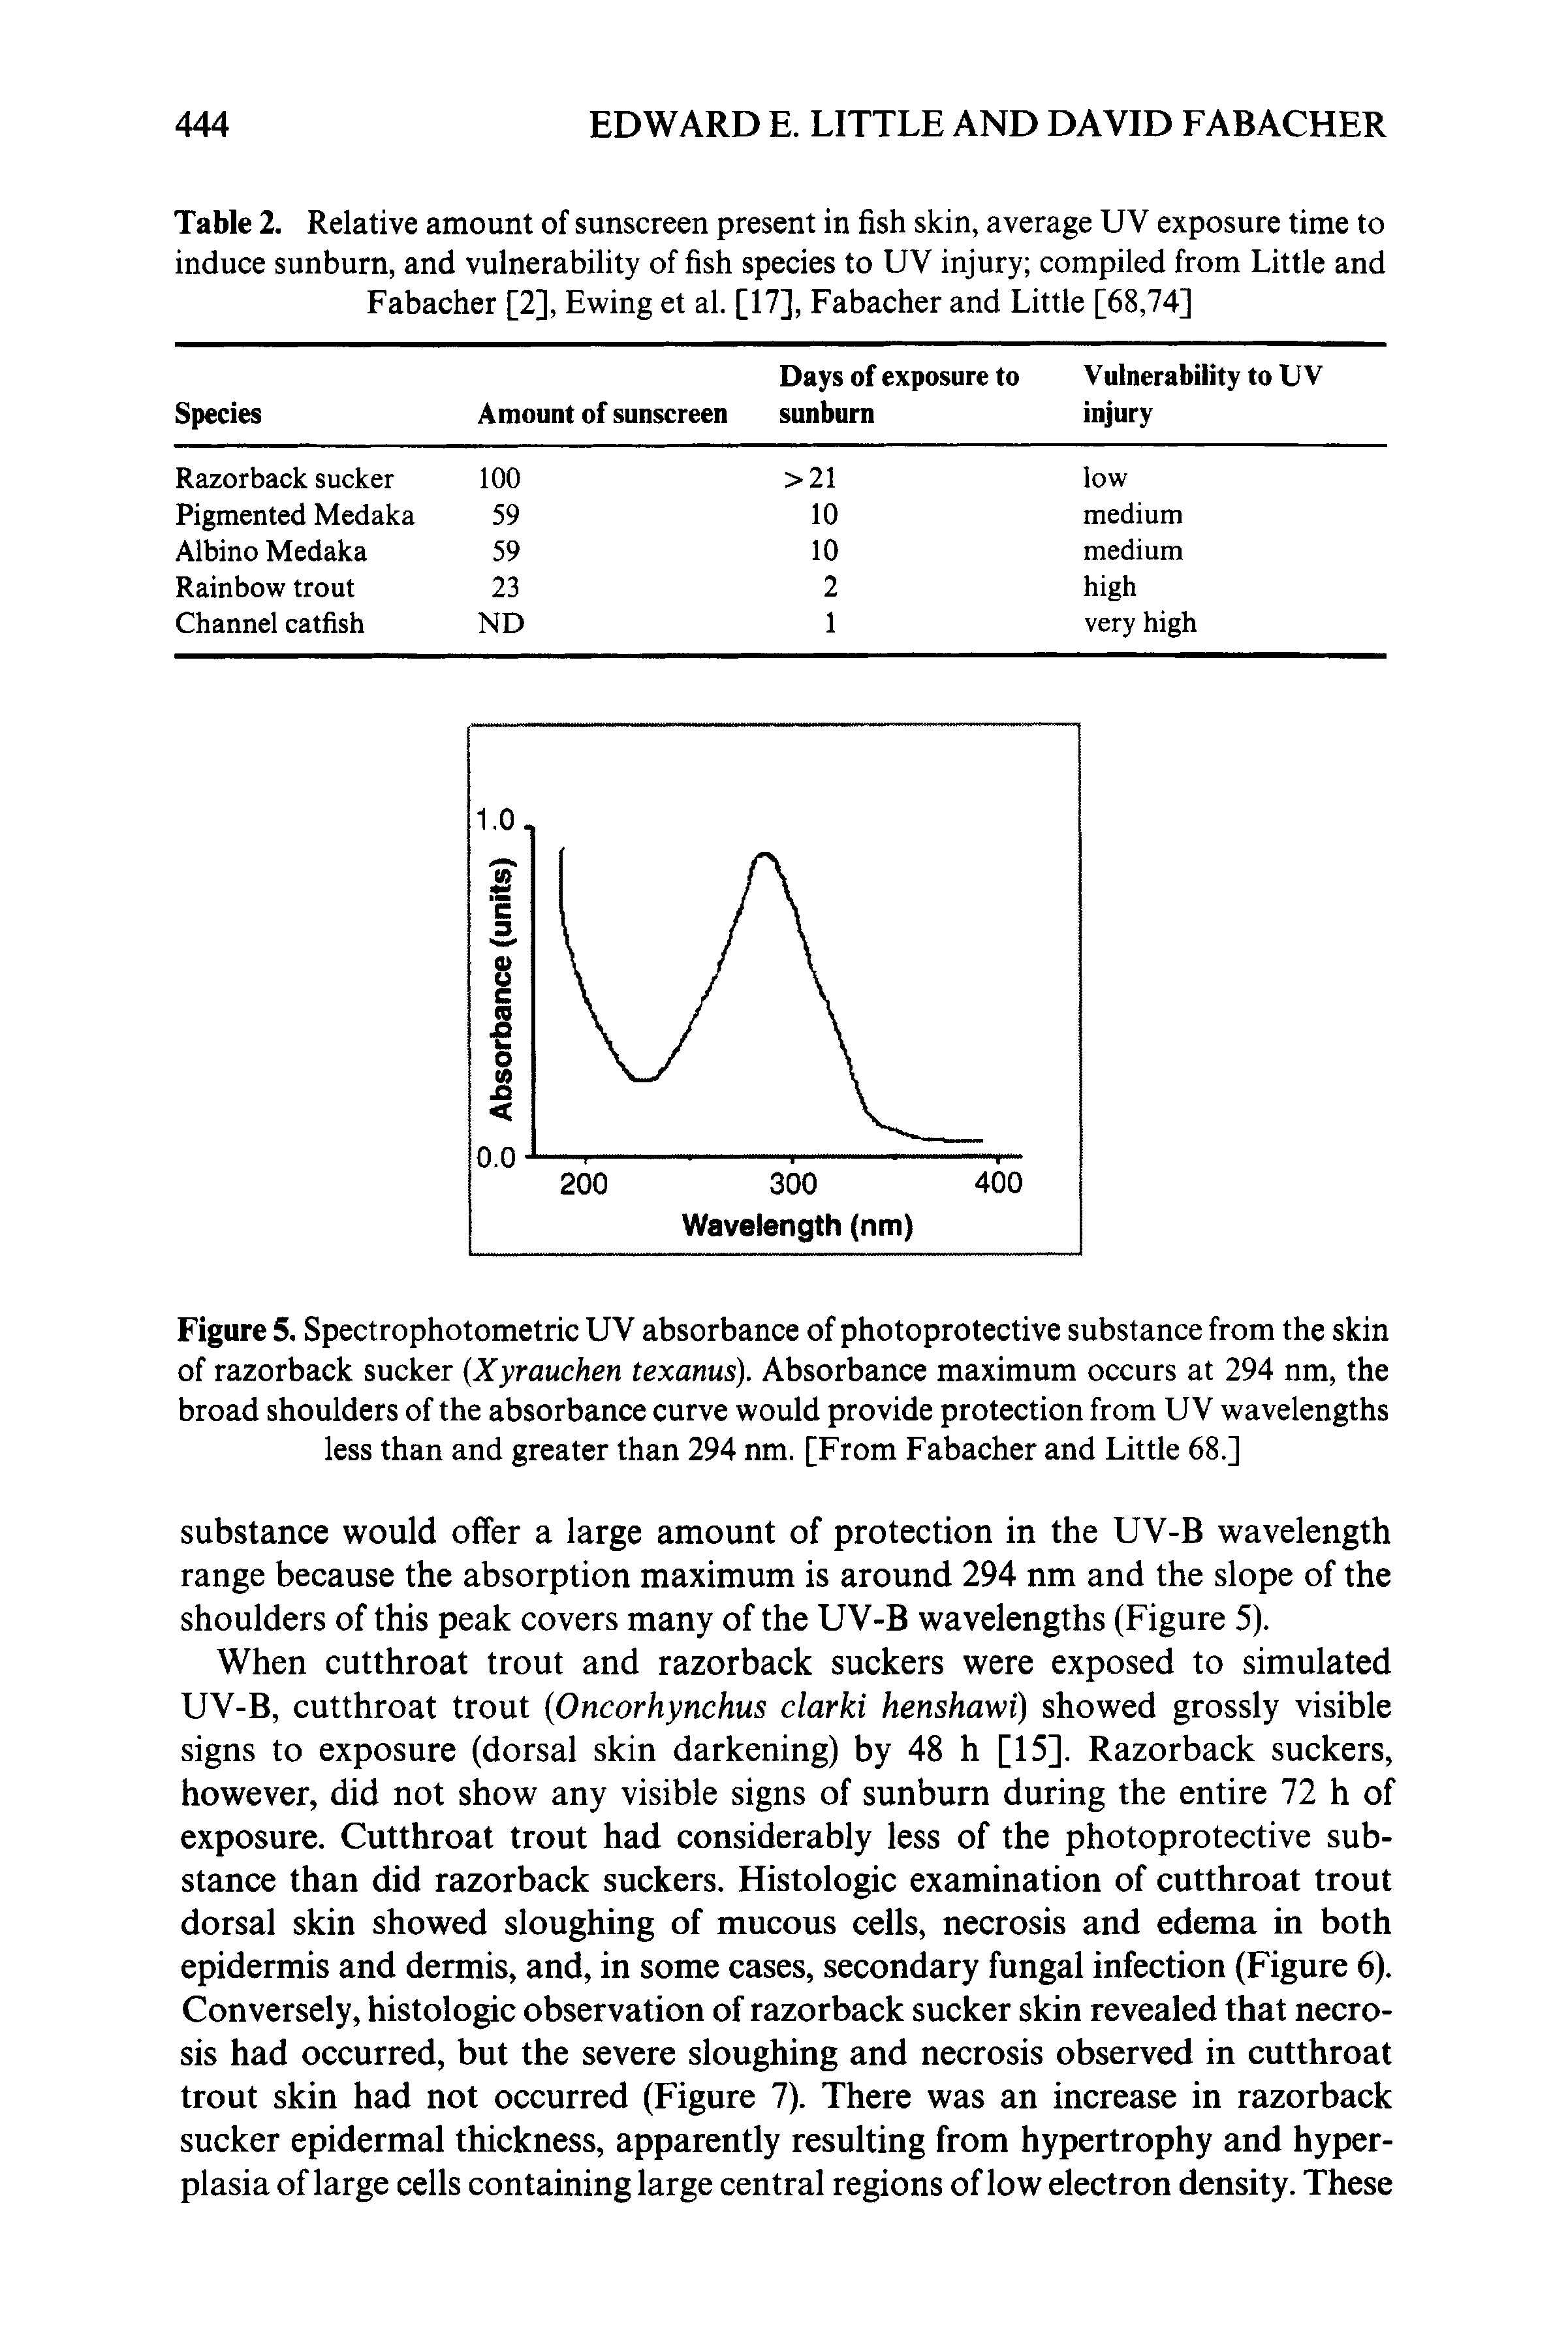 Figure 5. Spectrophotometric UV absorbance of photoprotective substance from the skin of razorback sucker Xyrauchen texanus). Absorbance maximum occurs at 294 nm, the broad shoulders of the absorbance curve would provide protection from UV wavelengths less than and greater than 294 nm. [From Fabacher and Little 68.]...